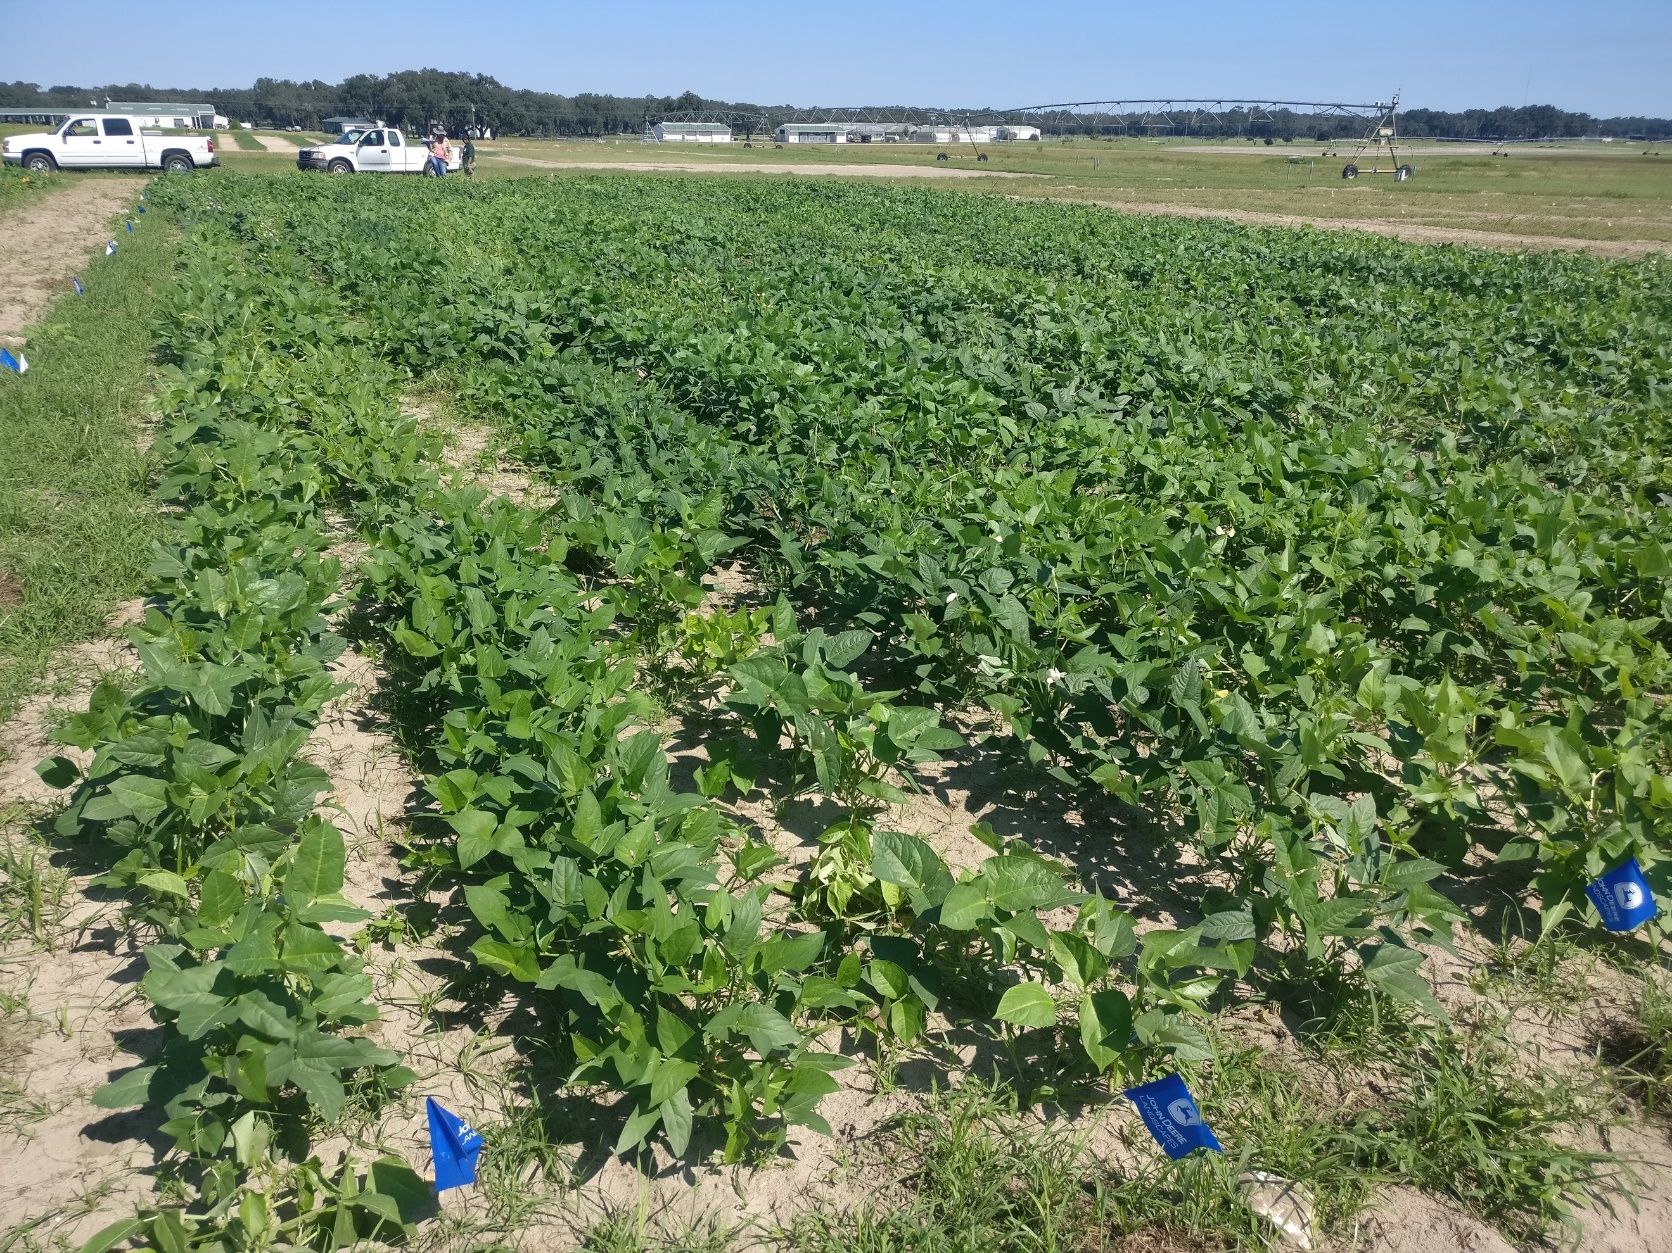 Cowpea breeding trial at the University of Florida.